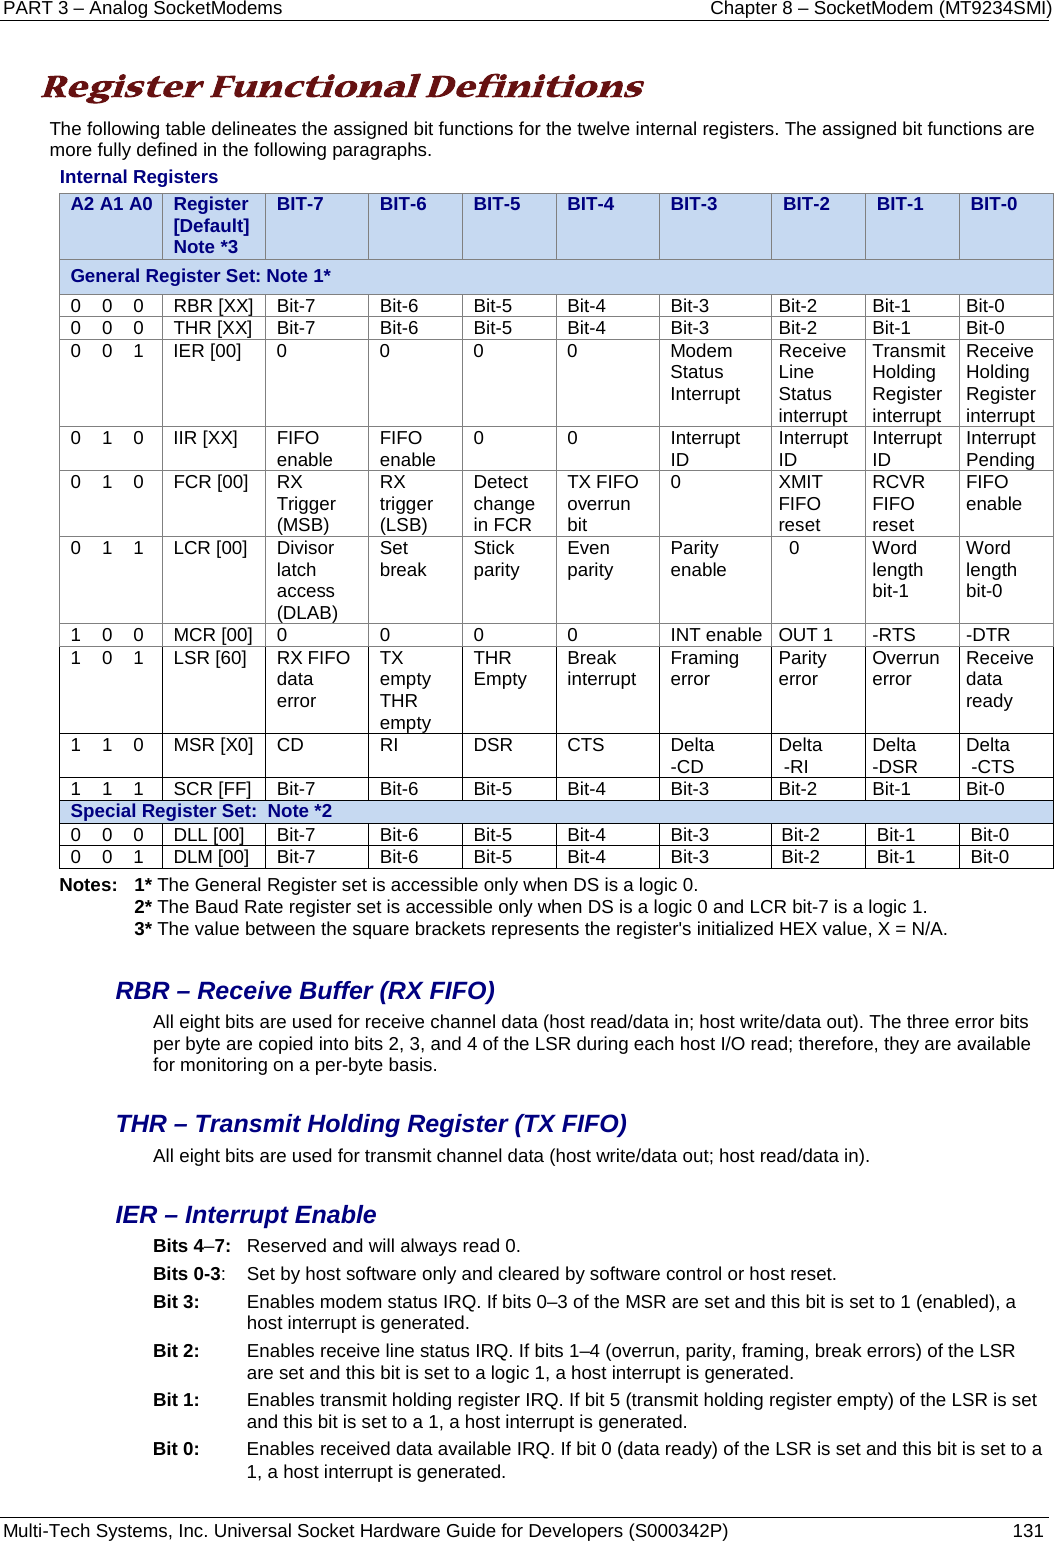 PART 3 – Analog SocketModems Chapter 8 – SocketModem (MT9234SMI) Multi-Tech Systems, Inc. Universal Socket Hardware Guide for Developers (S000342P)  131   Register Functional Definitions The following table delineates the assigned bit functions for the twelve internal registers. The assigned bit functions are more fully defined in the following paragraphs. Internal Registers A2 A1 A0 Register [Default]    Note *3 BIT-7 BIT-6 BIT-5 BIT-4 BIT-3 BIT-2 BIT-1 BIT-0 General Register Set: Note 1* 0    0    0 RBR [XX] Bit-7 Bit-6 Bit-5 Bit-4 Bit-3 Bit-2 Bit-1 Bit-0 0    0    0 THR [XX] Bit-7 Bit-6 Bit-5 Bit-4 Bit-3 Bit-2 Bit-1 Bit-0 0    0    1 IER [00]  0  0  0  0  Modem Status Interrupt Receive Line Status interrupt Transmit Holding Register interrupt Receive Holding Register interrupt 0    1    0 IIR [XX] FIFO enable  FIFO enable 0  0  Interrupt ID Interrupt ID Interrupt ID Interrupt Pending 0    1    0 FCR [00] RX Trigger (MSB) RX trigger (LSB) Detect change in FCR TX FIFO overrun bit 0 XMIT FIFO reset RCVR FIFO reset FIFO enable 0    1    1 LCR [00] Divisor latch access (DLAB) Set break Stick parity Even parity  Parity enable   0 Word length  bit-1 Word length bit-0 1    0    0 MCR [00] 0 0 0 0 INT enable OUT 1 -RTS -DTR 1    0    1 LSR [60] RX FIFO data error TX empty THR empty THR Empty Break interrupt Framing error Parity error Overrun error Receive data ready 1    1    0 MSR [X0] CD RI DSR CTS Delta  -CD Delta  -RI Delta  -DSR Delta  -CTS 1    1    1 SCR [FF] Bit-7 Bit-6 Bit-5 Bit-4 Bit-3 Bit-2 Bit-1 Bit-0 Special Register Set:  Note *2 0    0    0 DLL [00] Bit-7 Bit-6 Bit-5 Bit-4 Bit-3 Bit-2 Bit-1 Bit-0 0    0    1 DLM [00] Bit-7 Bit-6 Bit-5 Bit-4 Bit-3 Bit-2 Bit-1 Bit-0 Notes:   1* The General Register set is accessible only when DS is a logic 0. 2* The Baud Rate register set is accessible only when DS is a logic 0 and LCR bit-7 is a logic 1. 3* The value between the square brackets represents the register&apos;s initialized HEX value, X = N/A.  RBR – Receive Buffer (RX FIFO) All eight bits are used for receive channel data (host read/data in; host write/data out). The three error bits per byte are copied into bits 2, 3, and 4 of the LSR during each host I/O read; therefore, they are available for monitoring on a per-byte basis.  THR – Transmit Holding Register (TX FIFO) All eight bits are used for transmit channel data (host write/data out; host read/data in).  IER – Interrupt Enable Bits 4–7:  Reserved and will always read 0. Bits 0-3:  Set by host software only and cleared by software control or host reset. Bit 3: Enables modem status IRQ. If bits 0–3 of the MSR are set and this bit is set to 1 (enabled), a host interrupt is generated. Bit 2: Enables receive line status IRQ. If bits 1–4 (overrun, parity, framing, break errors) of the LSR are set and this bit is set to a logic 1, a host interrupt is generated. Bit 1: Enables transmit holding register IRQ. If bit 5 (transmit holding register empty) of the LSR is set and this bit is set to a 1, a host interrupt is generated. Bit 0: Enables received data available IRQ. If bit 0 (data ready) of the LSR is set and this bit is set to a 1, a host interrupt is generated.    